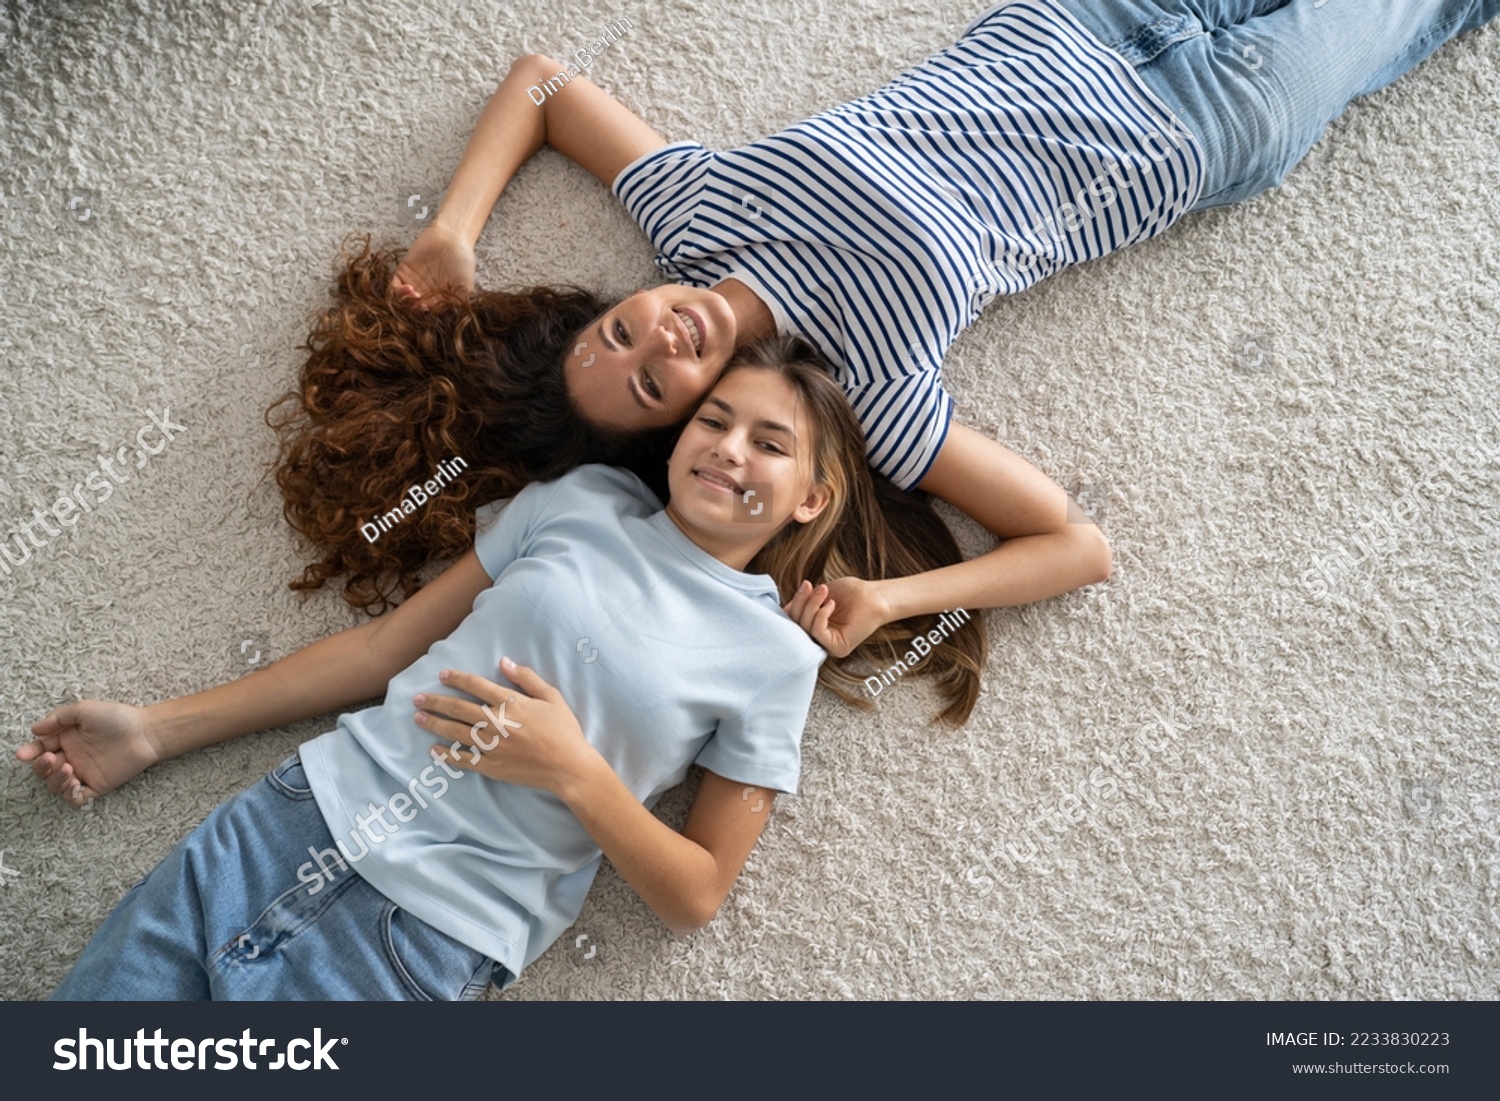 Satisfied relaxed woman nanny and teen girl both lie on floor in apartment and smiled look at camera top view. Happy close-knit family life of mother and daughter of school age dressed in casual style #2233830223